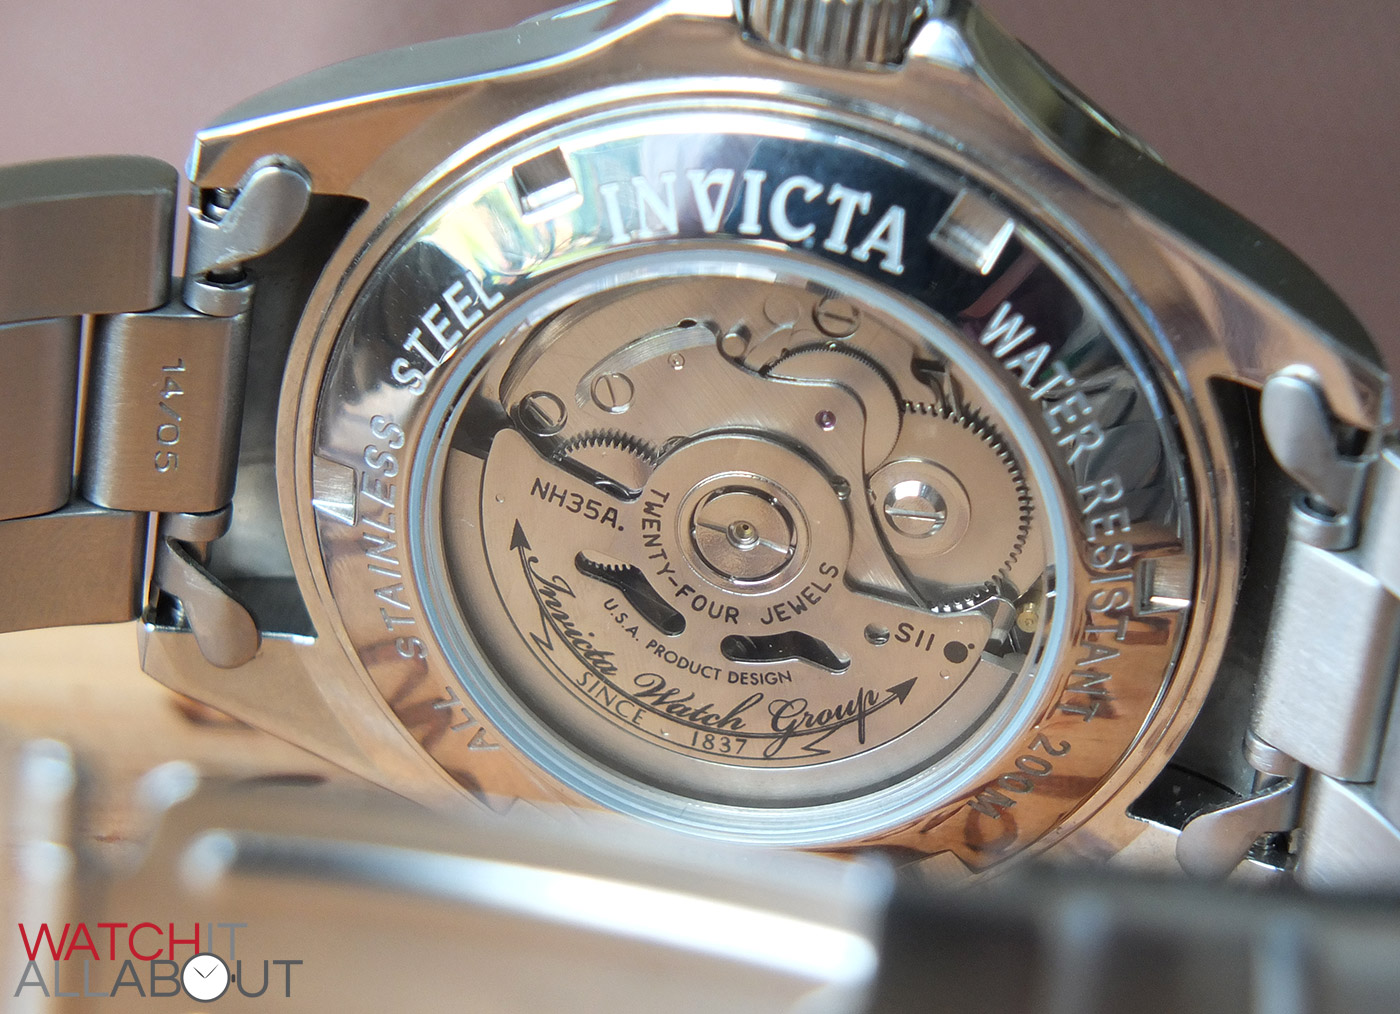 Invicta Pro Diver 9094 Watch Review - 12&60